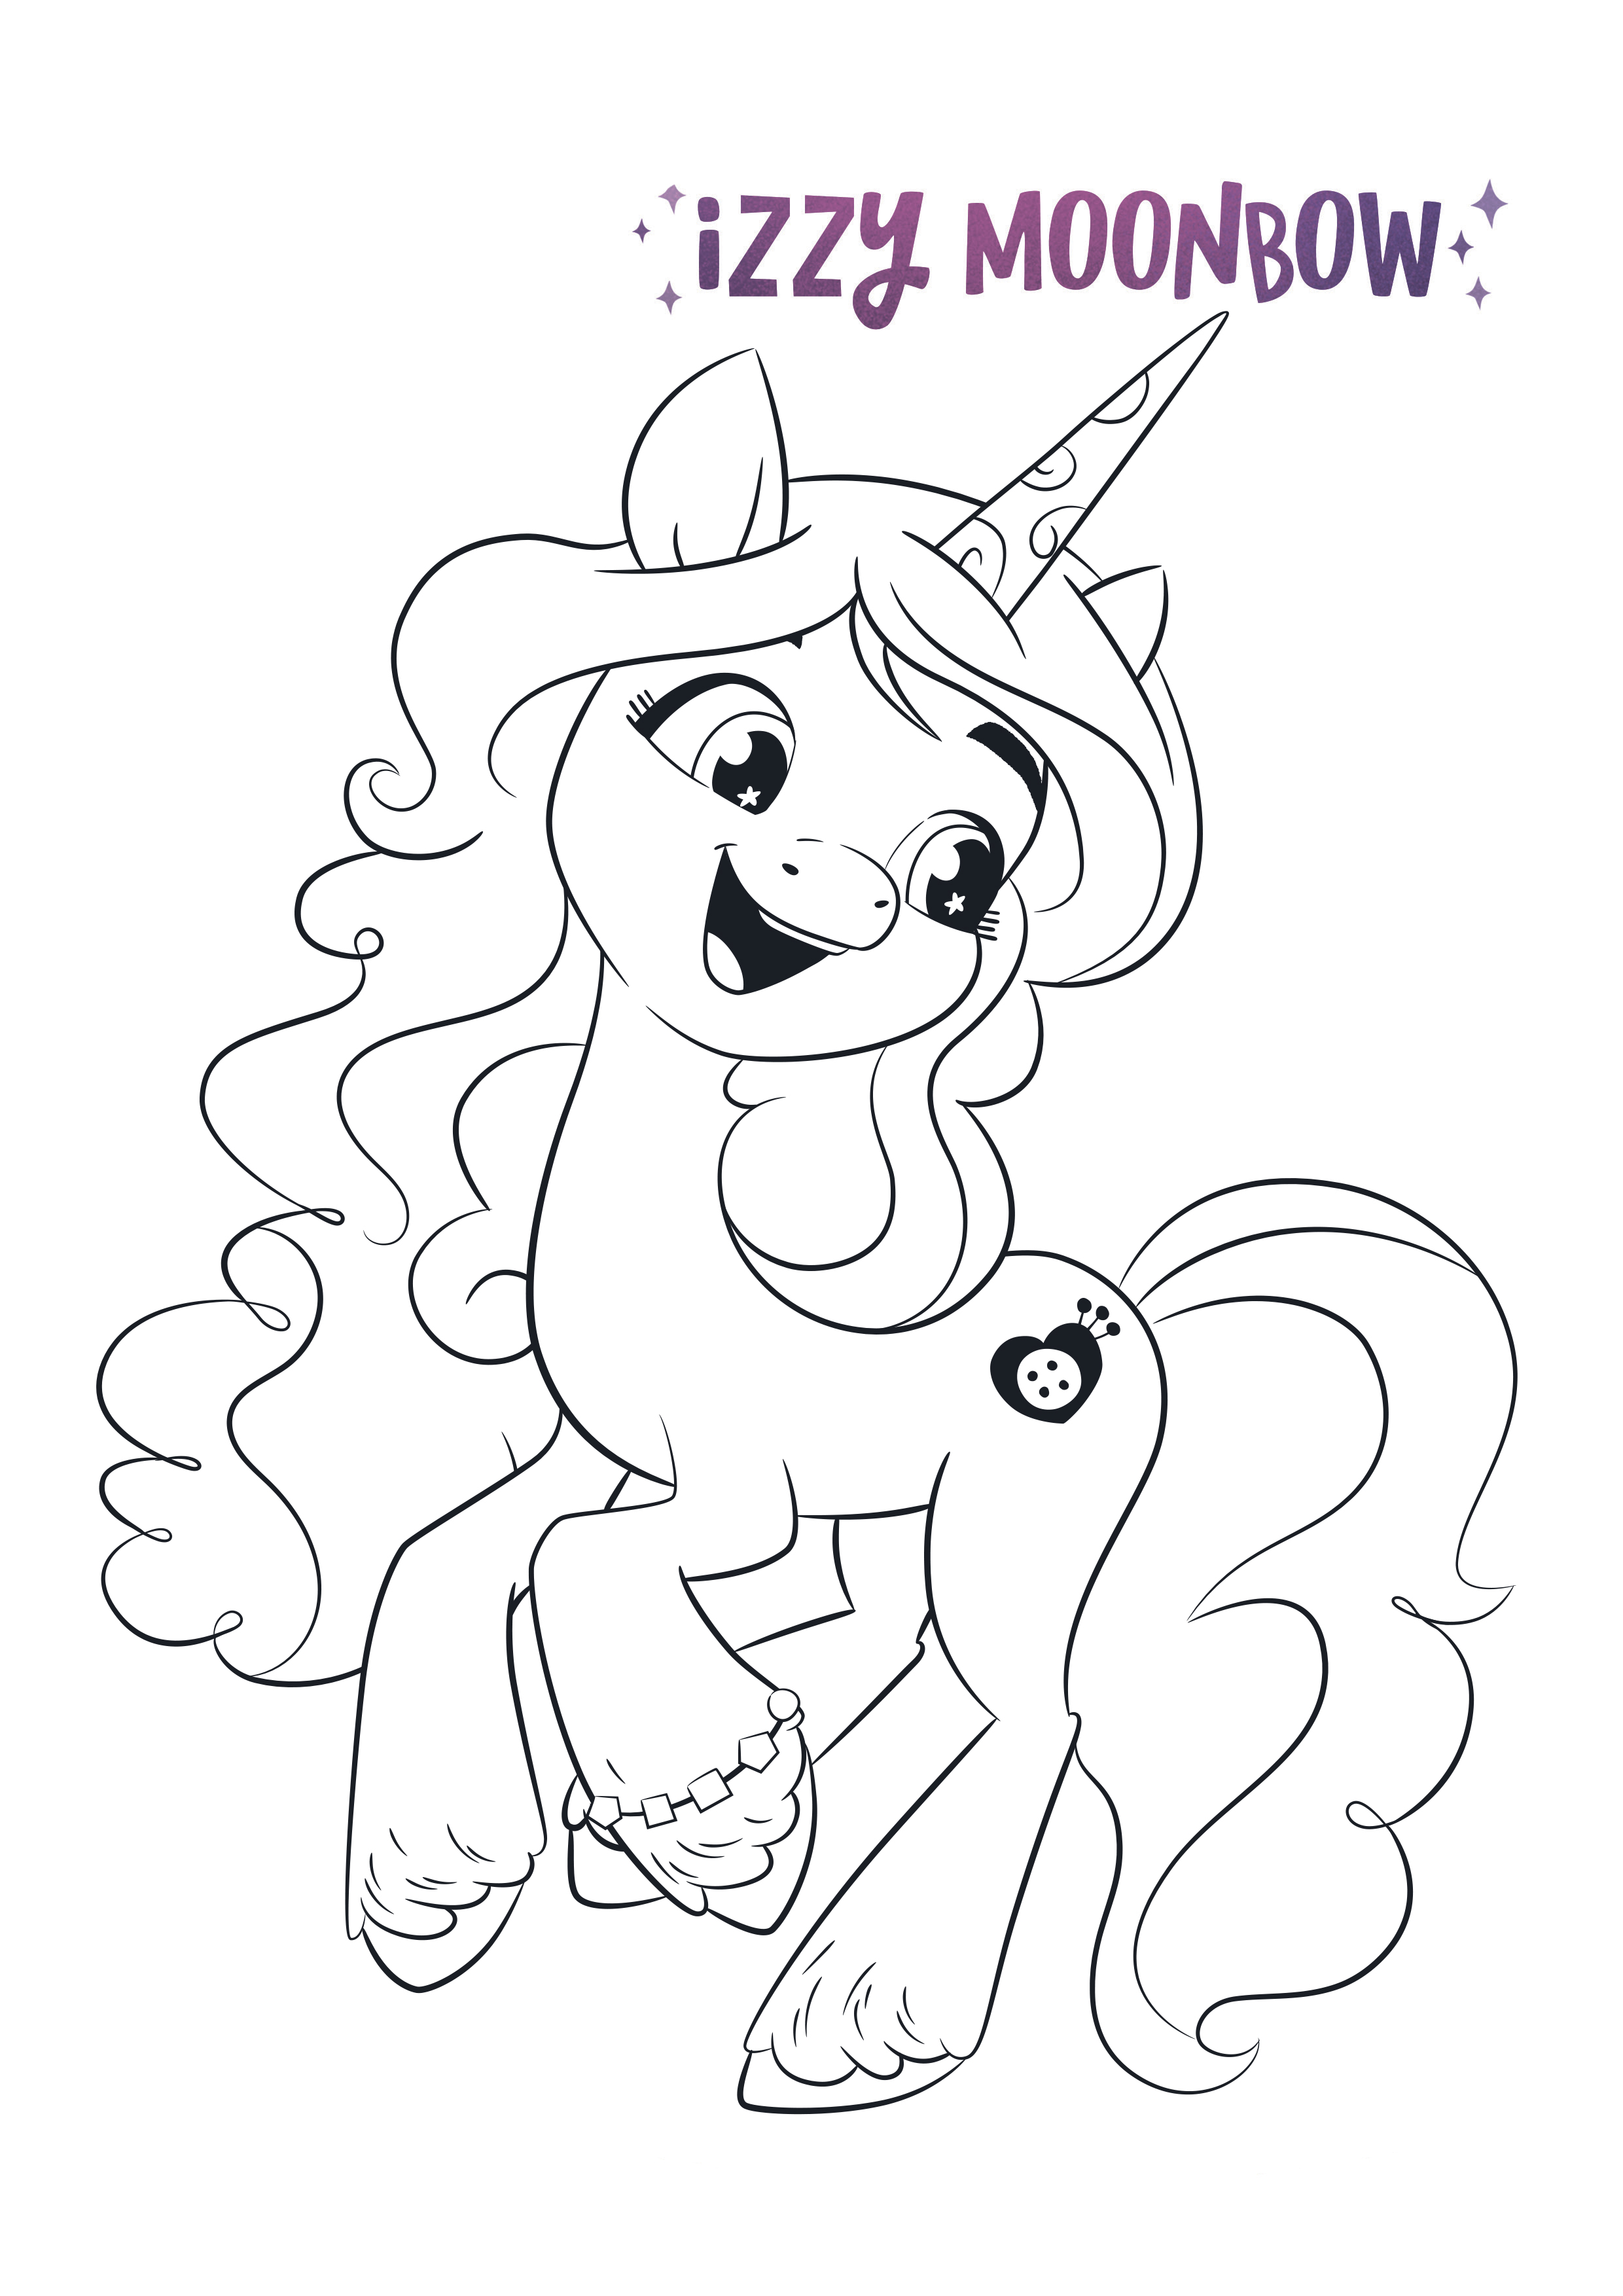 My little pony a new generation movie coloring pages